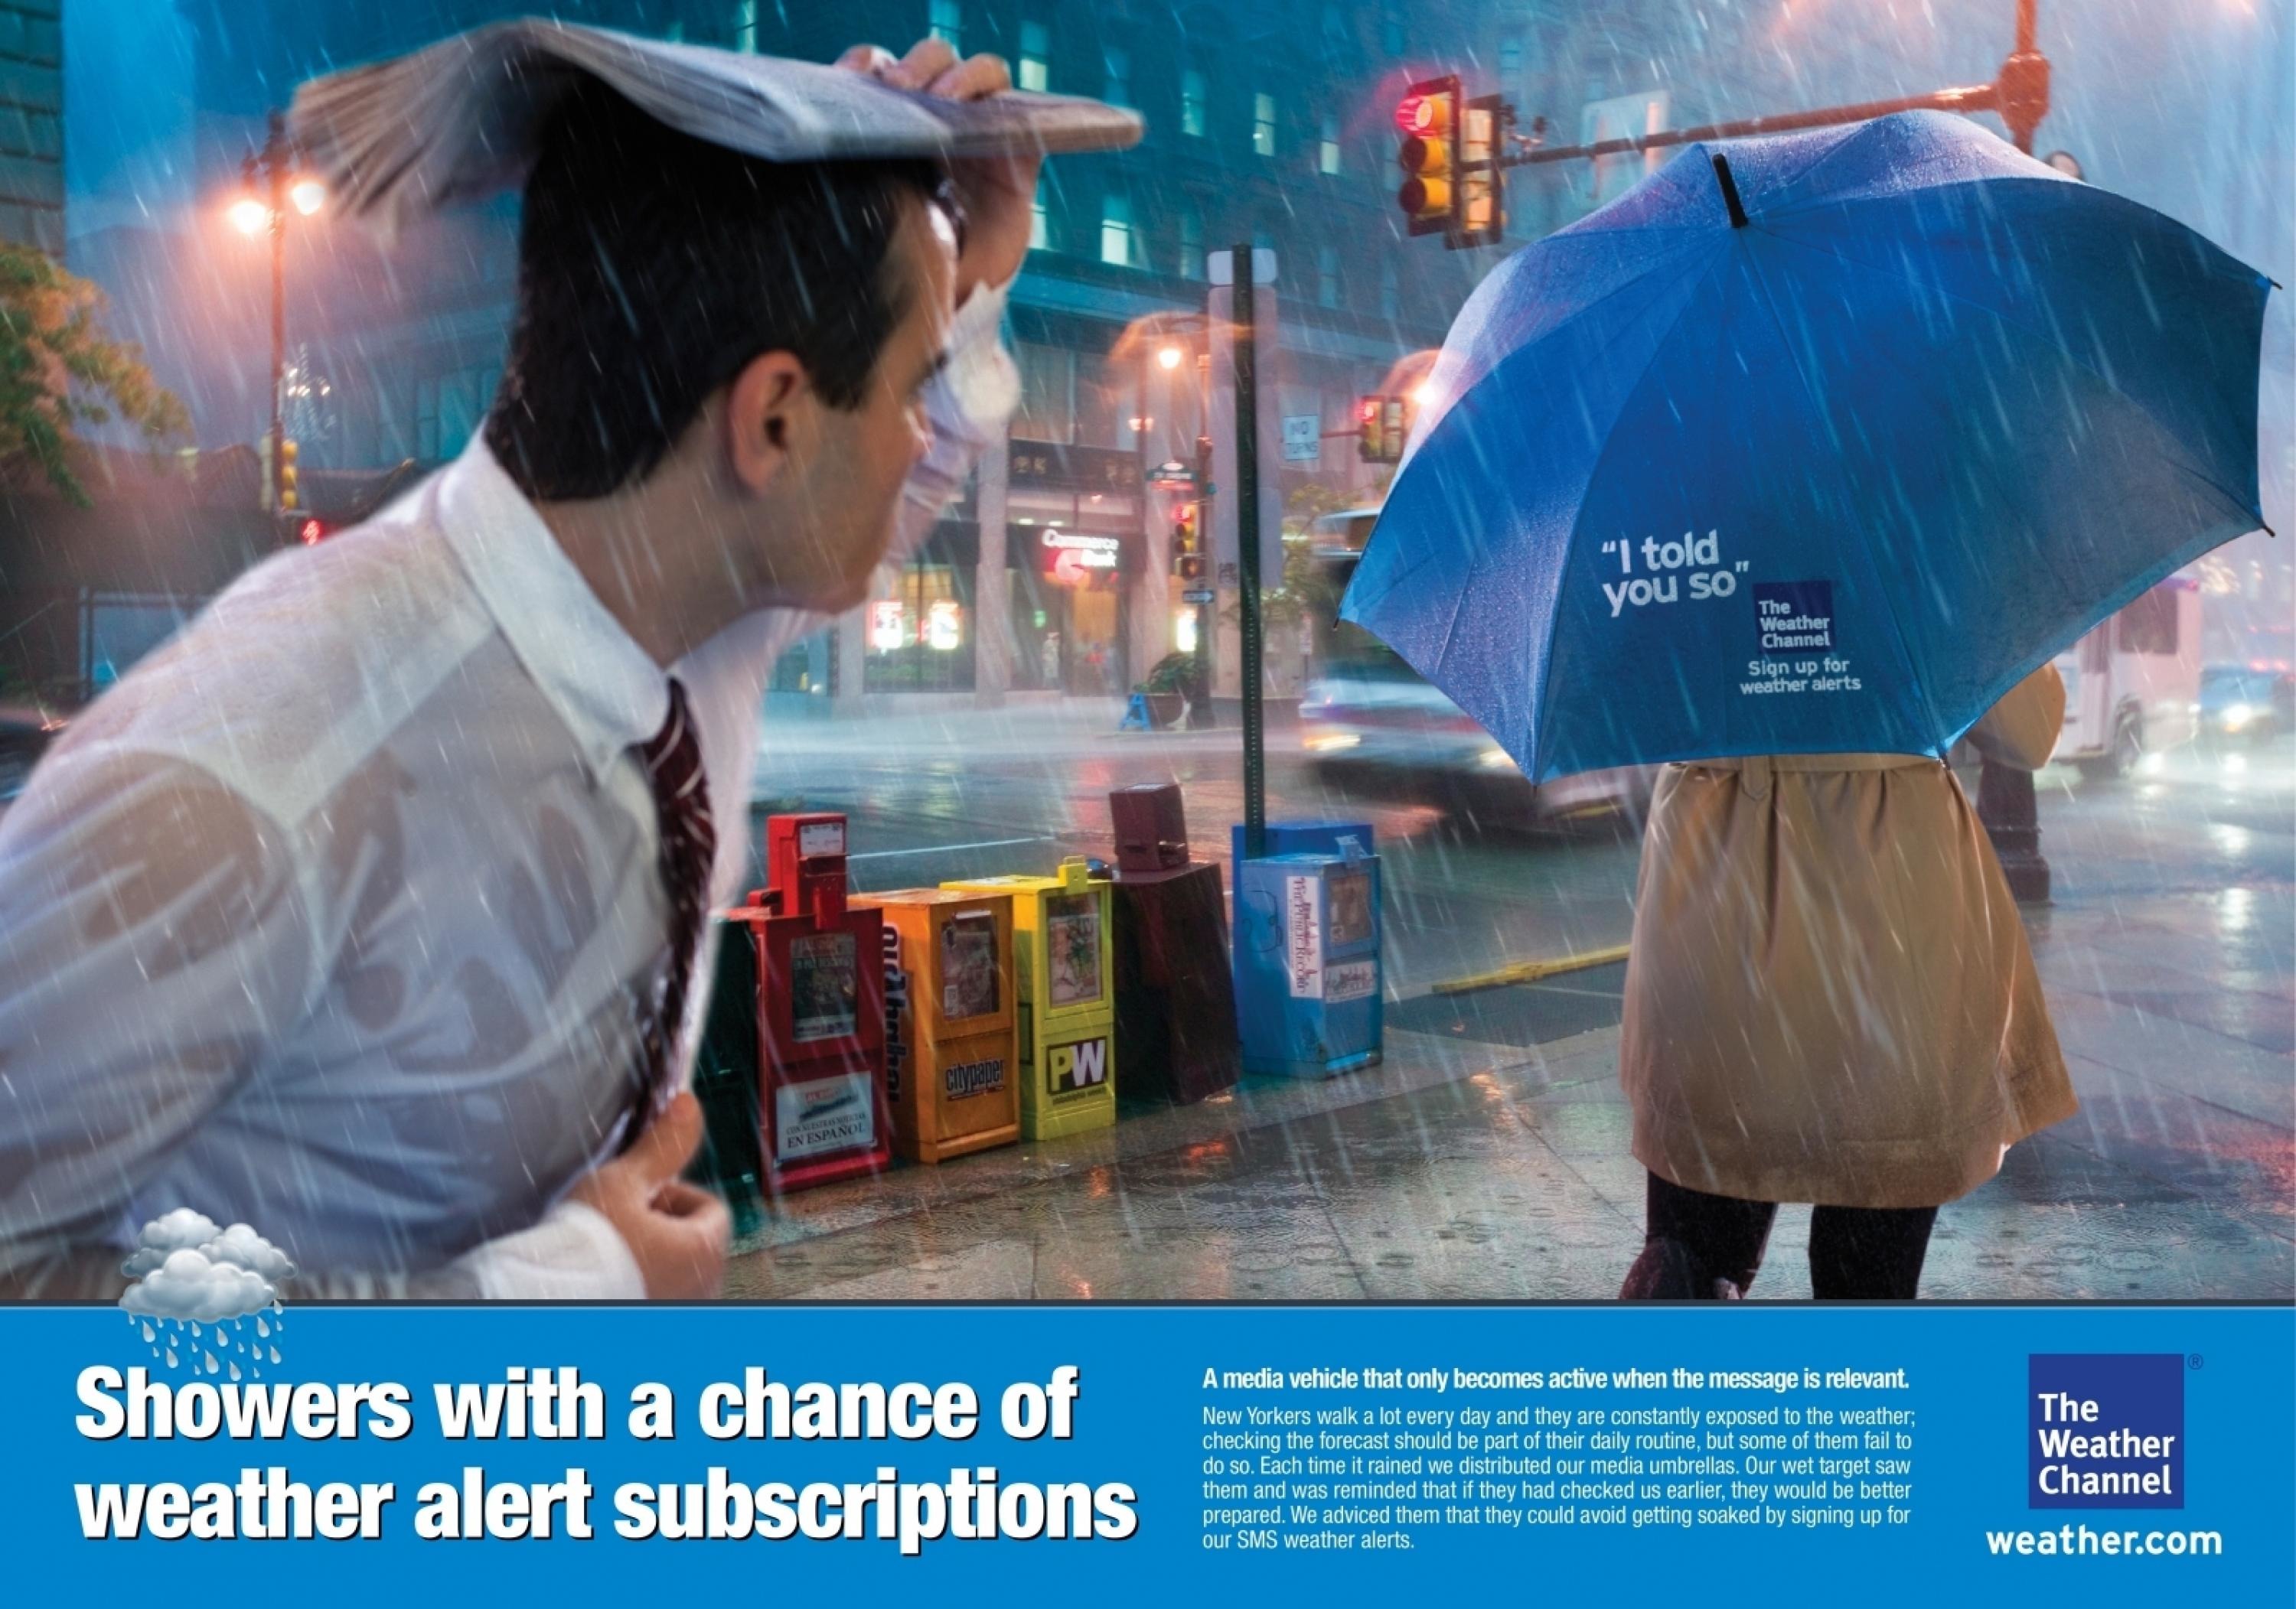 SHOWERS WITH A CHANCE OF WEATHER ALERTS SUBSCRIPTIONS